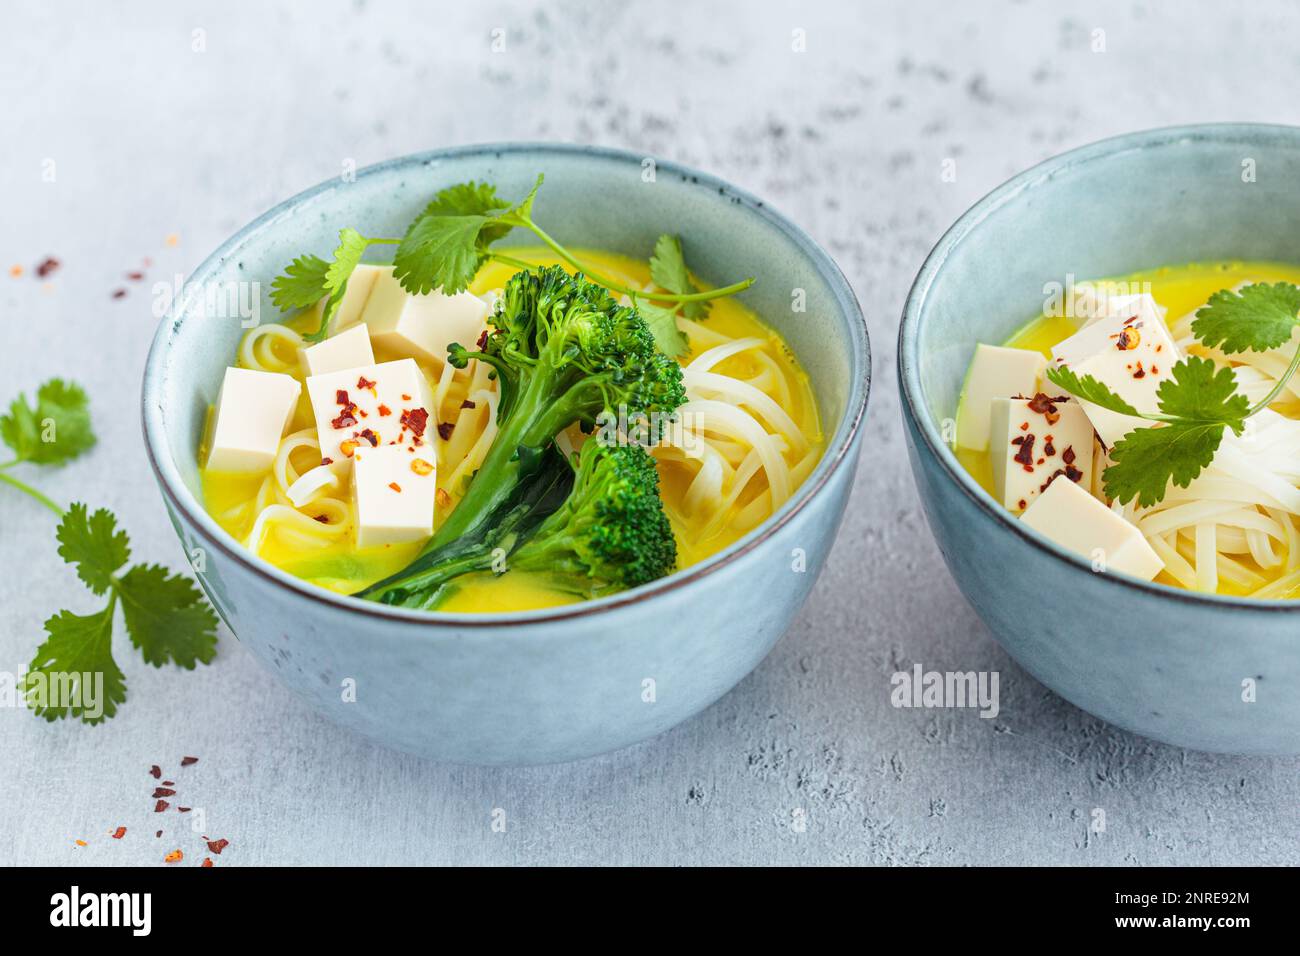 Vegan curry laksa with rice noodles, broccoli and tofu in blue bowls, gray background. Stock Photo